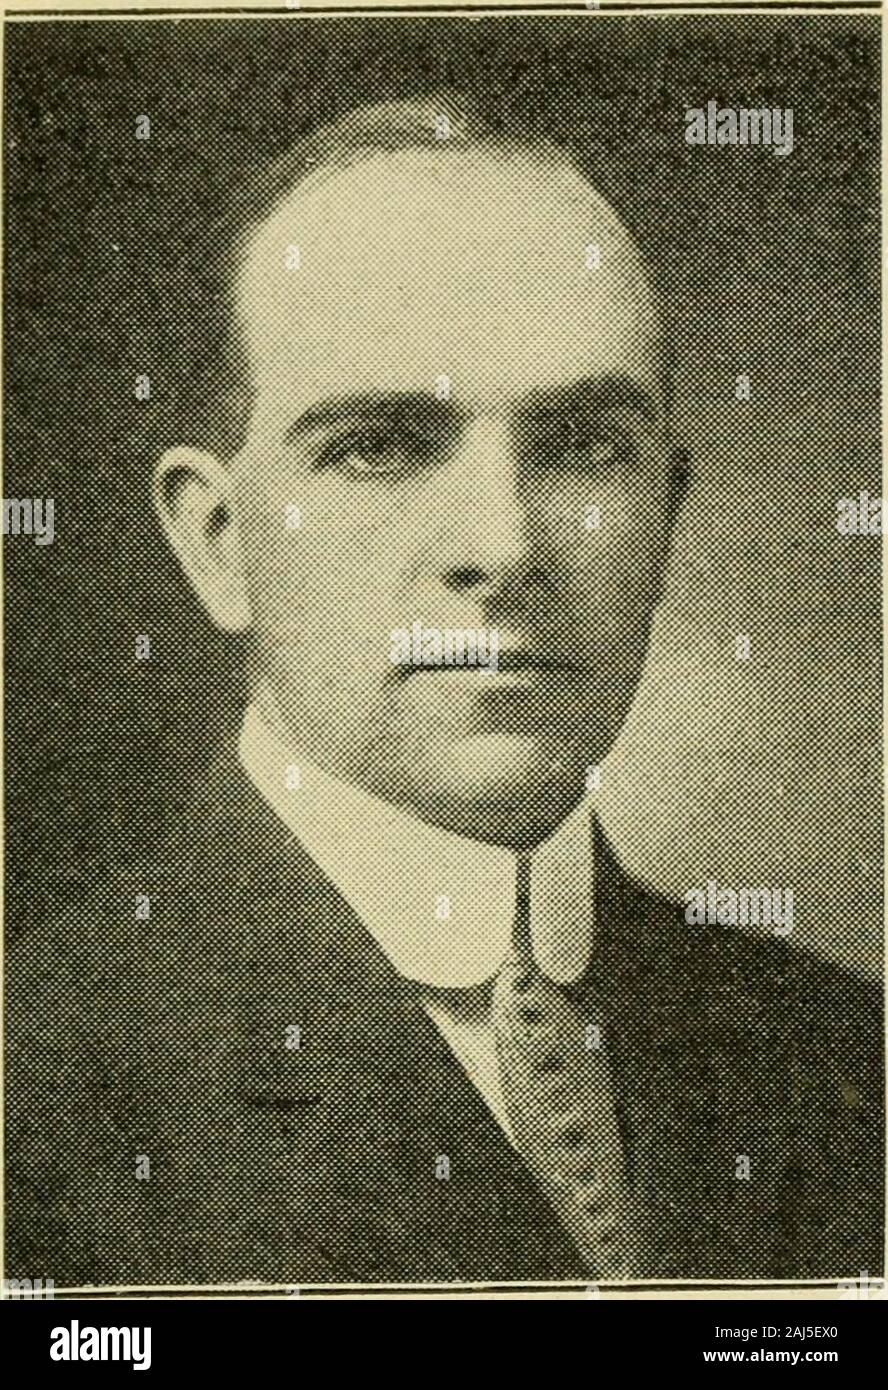 Public officials of Massachusetts . HULL, JOHN CARPENTER, Leomin-ster, llth Worcester House District, Re-publican. Born: Portland, Me., Nov. 1, 1870. Educated: Bowdoin College, 92. Profession: Lawyer. Organizations: A. F. & A. M., past mas-ter; Grange, American Bar Assn. Public office: Leominster School Board1912 to 1915, Moderator all LeominsterTown meetings 1912 to 1915; Mass. House1916, 1917, 1918, 1919, 1920. 192. HUNNEWELL, JAMES MELVILLE,Boston, 8tli Suffolk House District, Re-publican. Born: Boston, May 22, 1879. Educated: Hopkinson School, HarvardColl., A. B. 01, LL.B. 04. Profession: Stock Photo